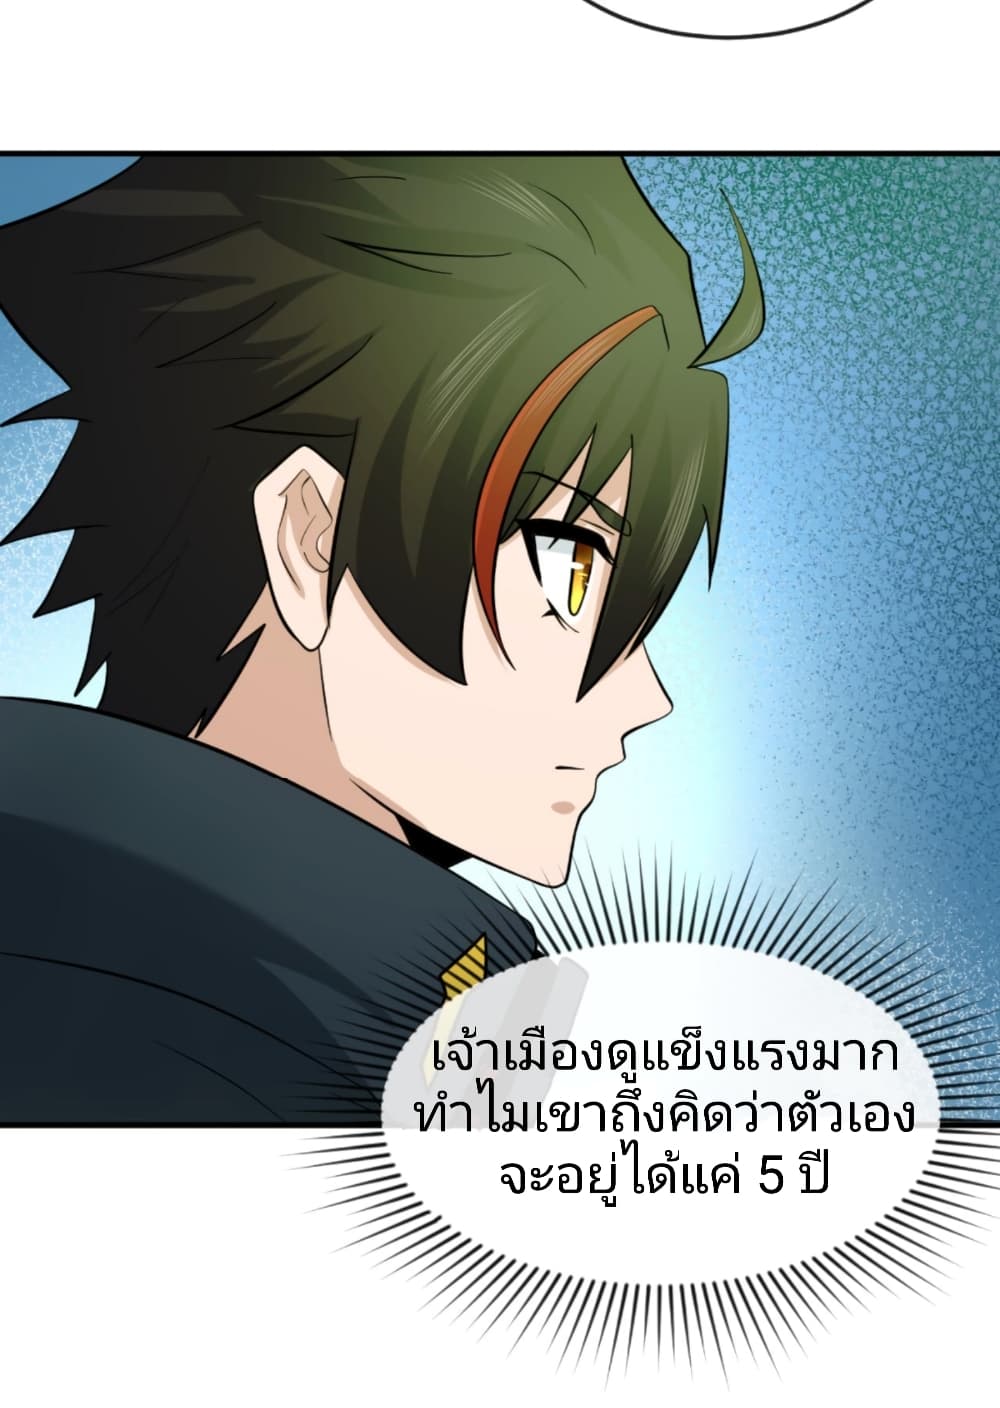 The Age of Ghost Spirits à¸à¸­à¸à¸à¸µà¹ 39 (30)